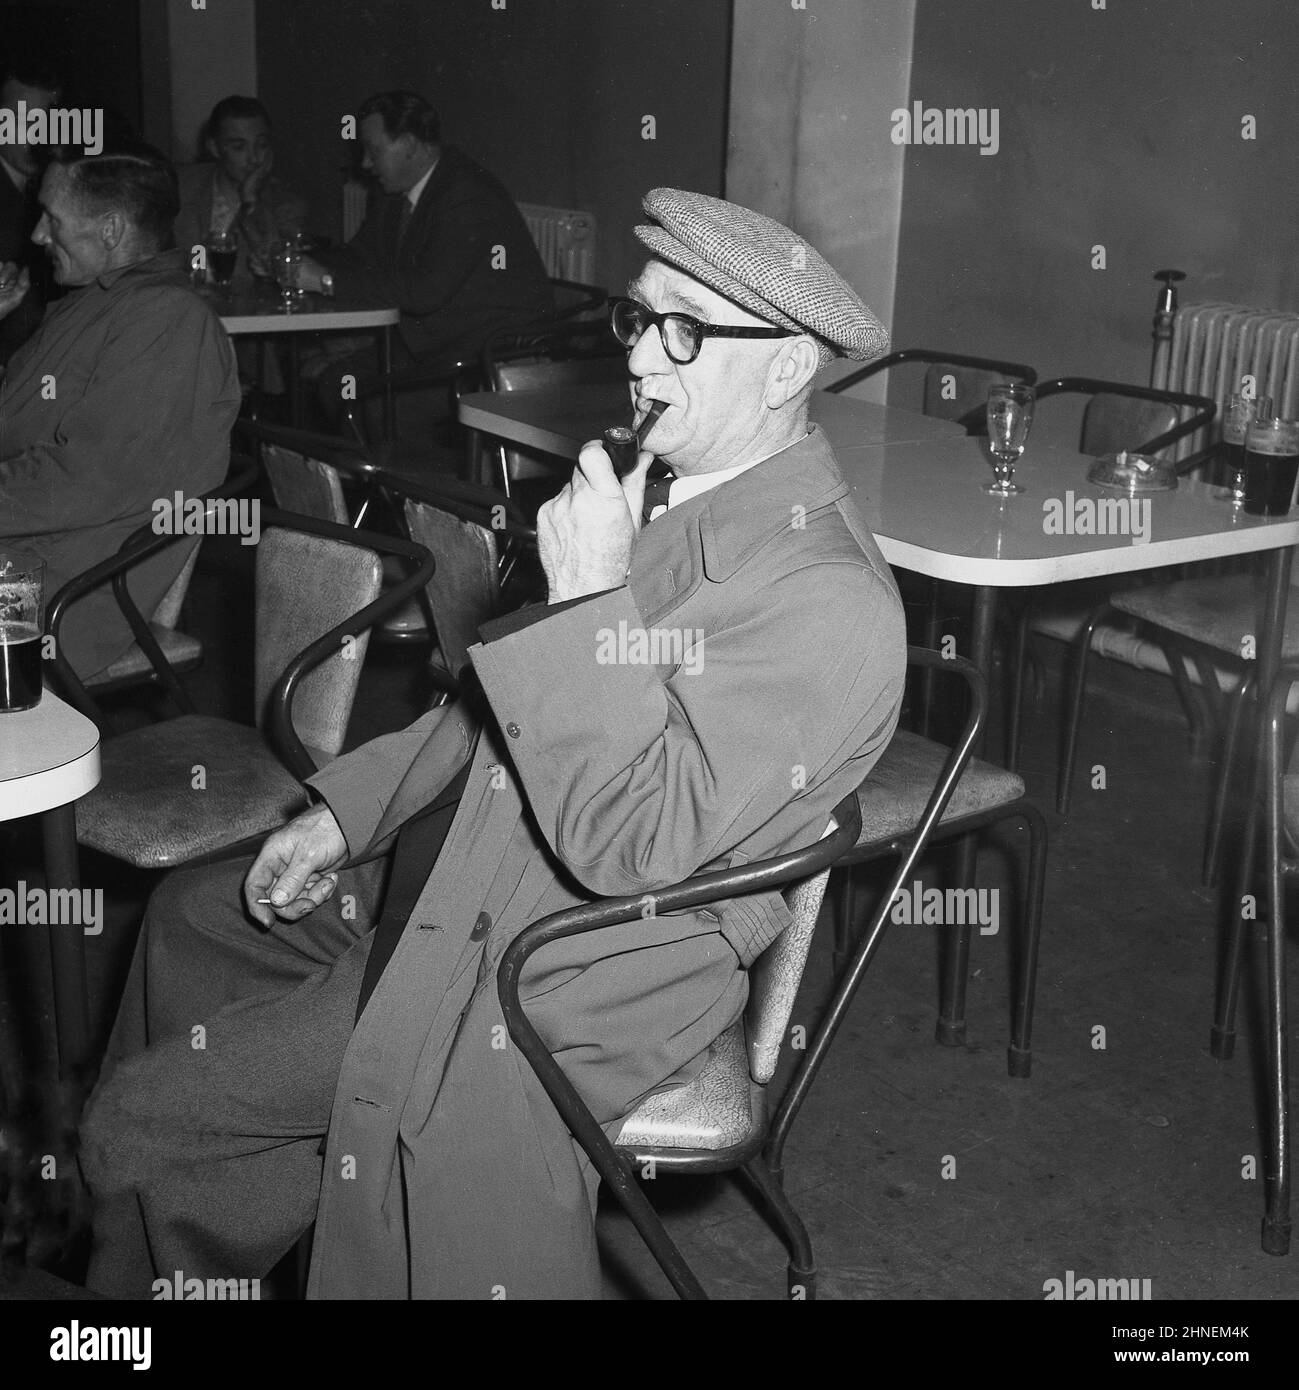 1950s, historical, a working man wearing jacket and trousers, a raincoat, clothcap and smoking a pipe, sitting having a drink, a pint of beer, in the company social club after work, Port Talbot, Wales, UK. Stock Photo